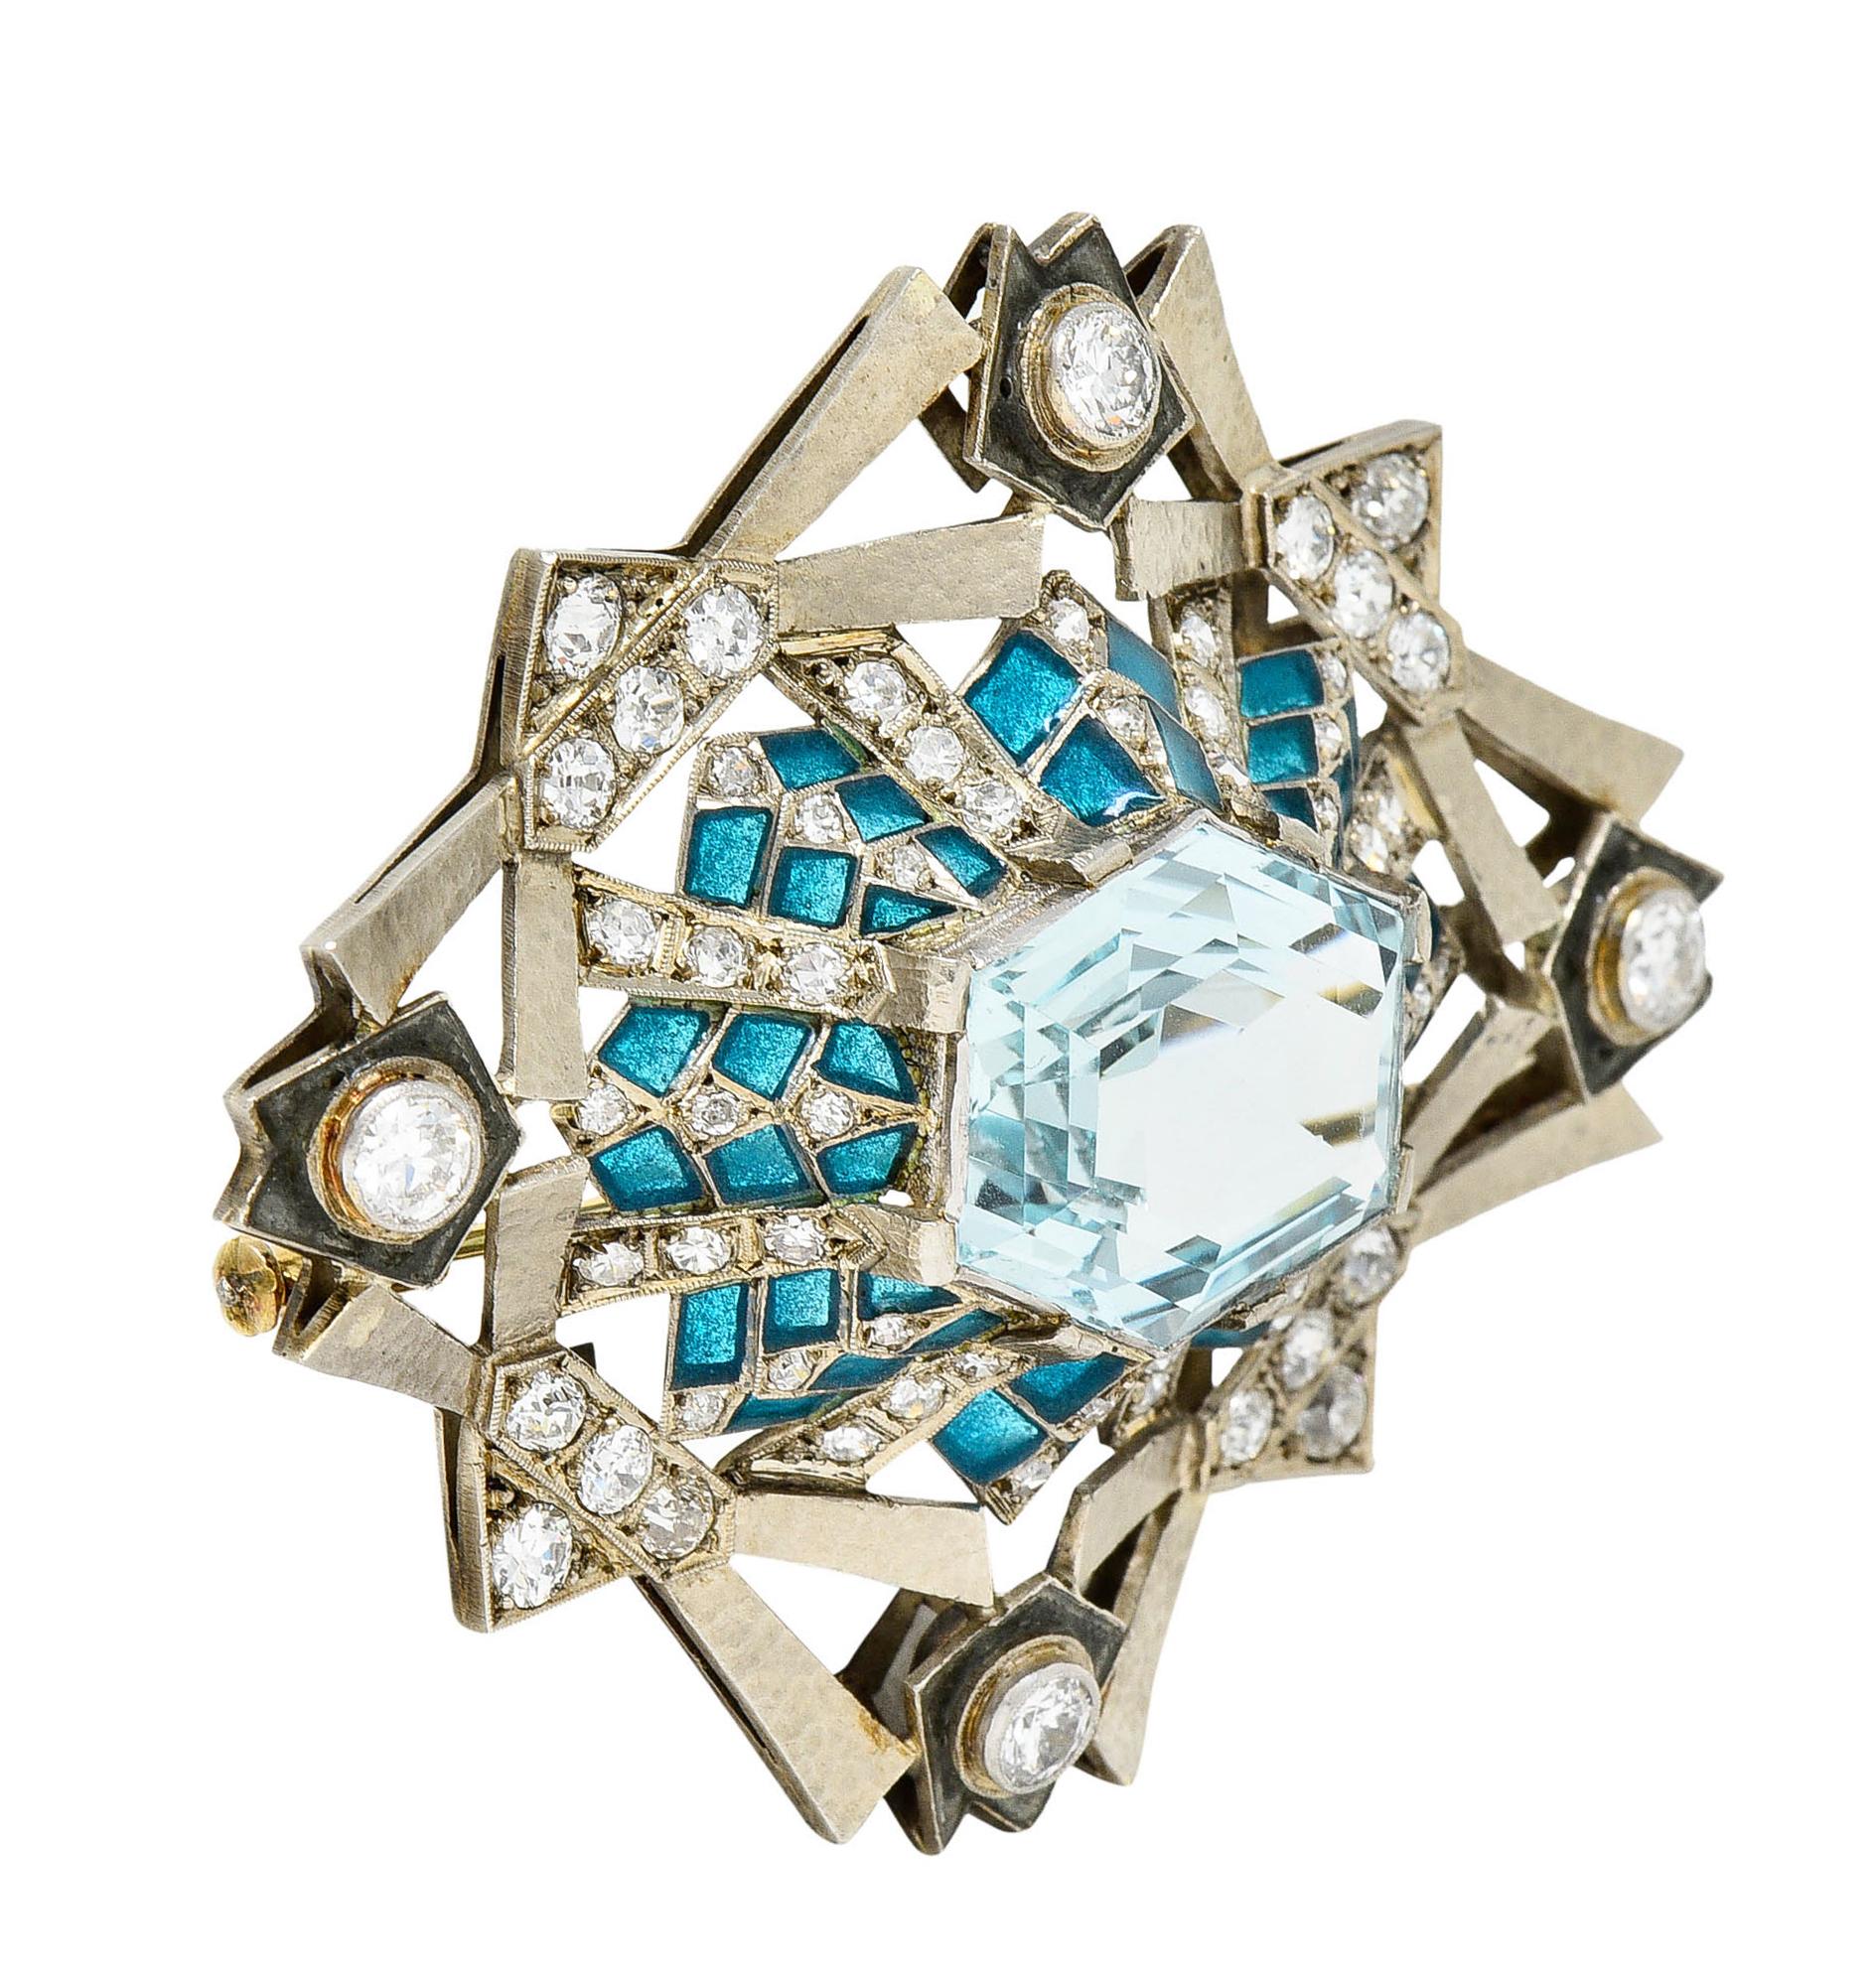 Substantial brooch is designed as a dimensional and geometric burst motif

Centering a hexagonal cut aquamarine weighing approximately 13.25 carats - greenish blue in color

Surrounded by a teal plique-a-jour design with no loss

With old European